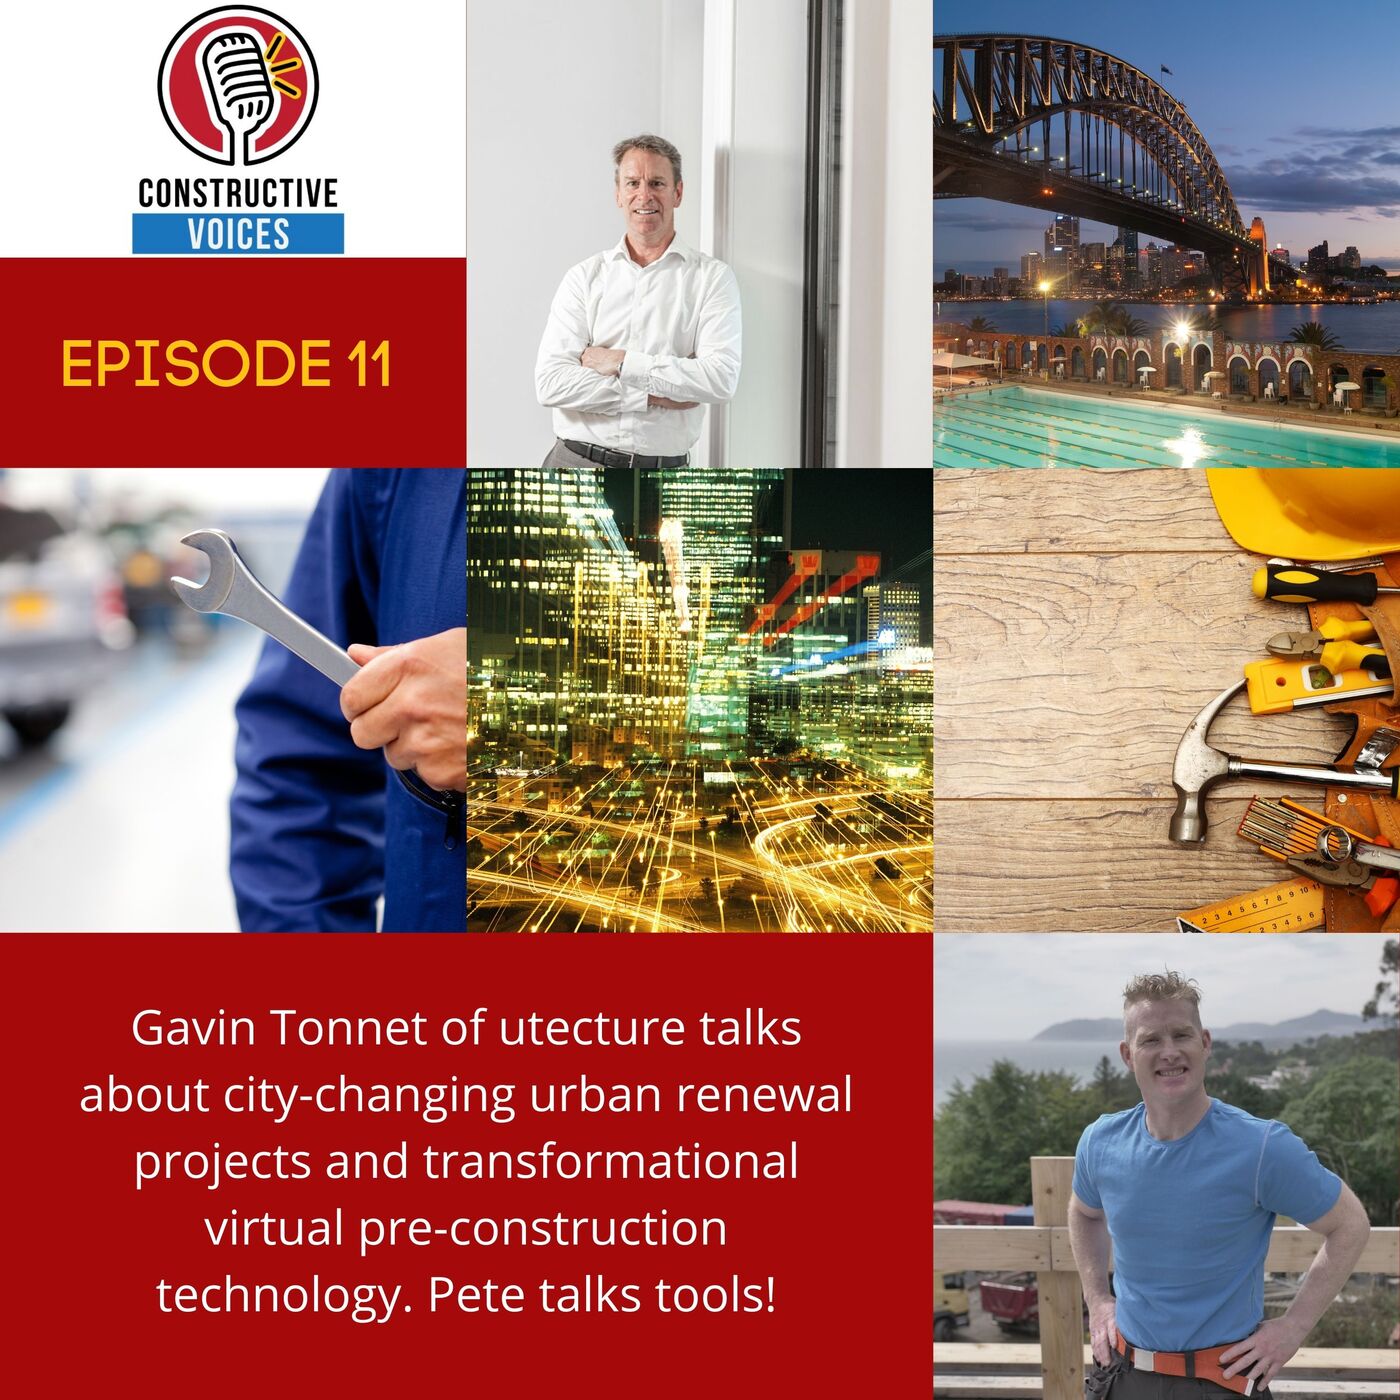 Gavin Tonnet of utecture on city-changing urban renewal projects and transformational virtual pre-construction technology. Pete The Builder talks about The Tool Revolution